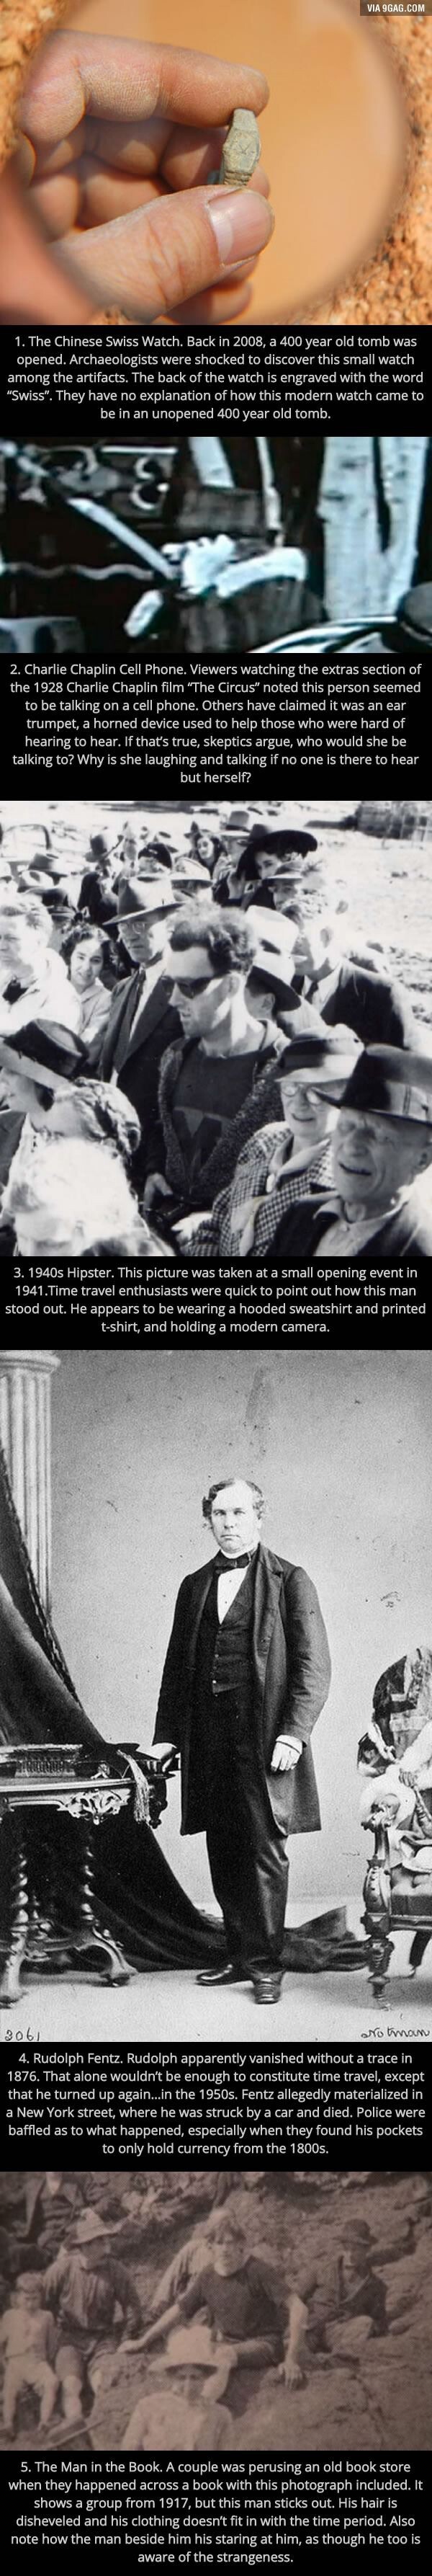 5 Bizarre Pictures Which "Prove" Time Travel Exists